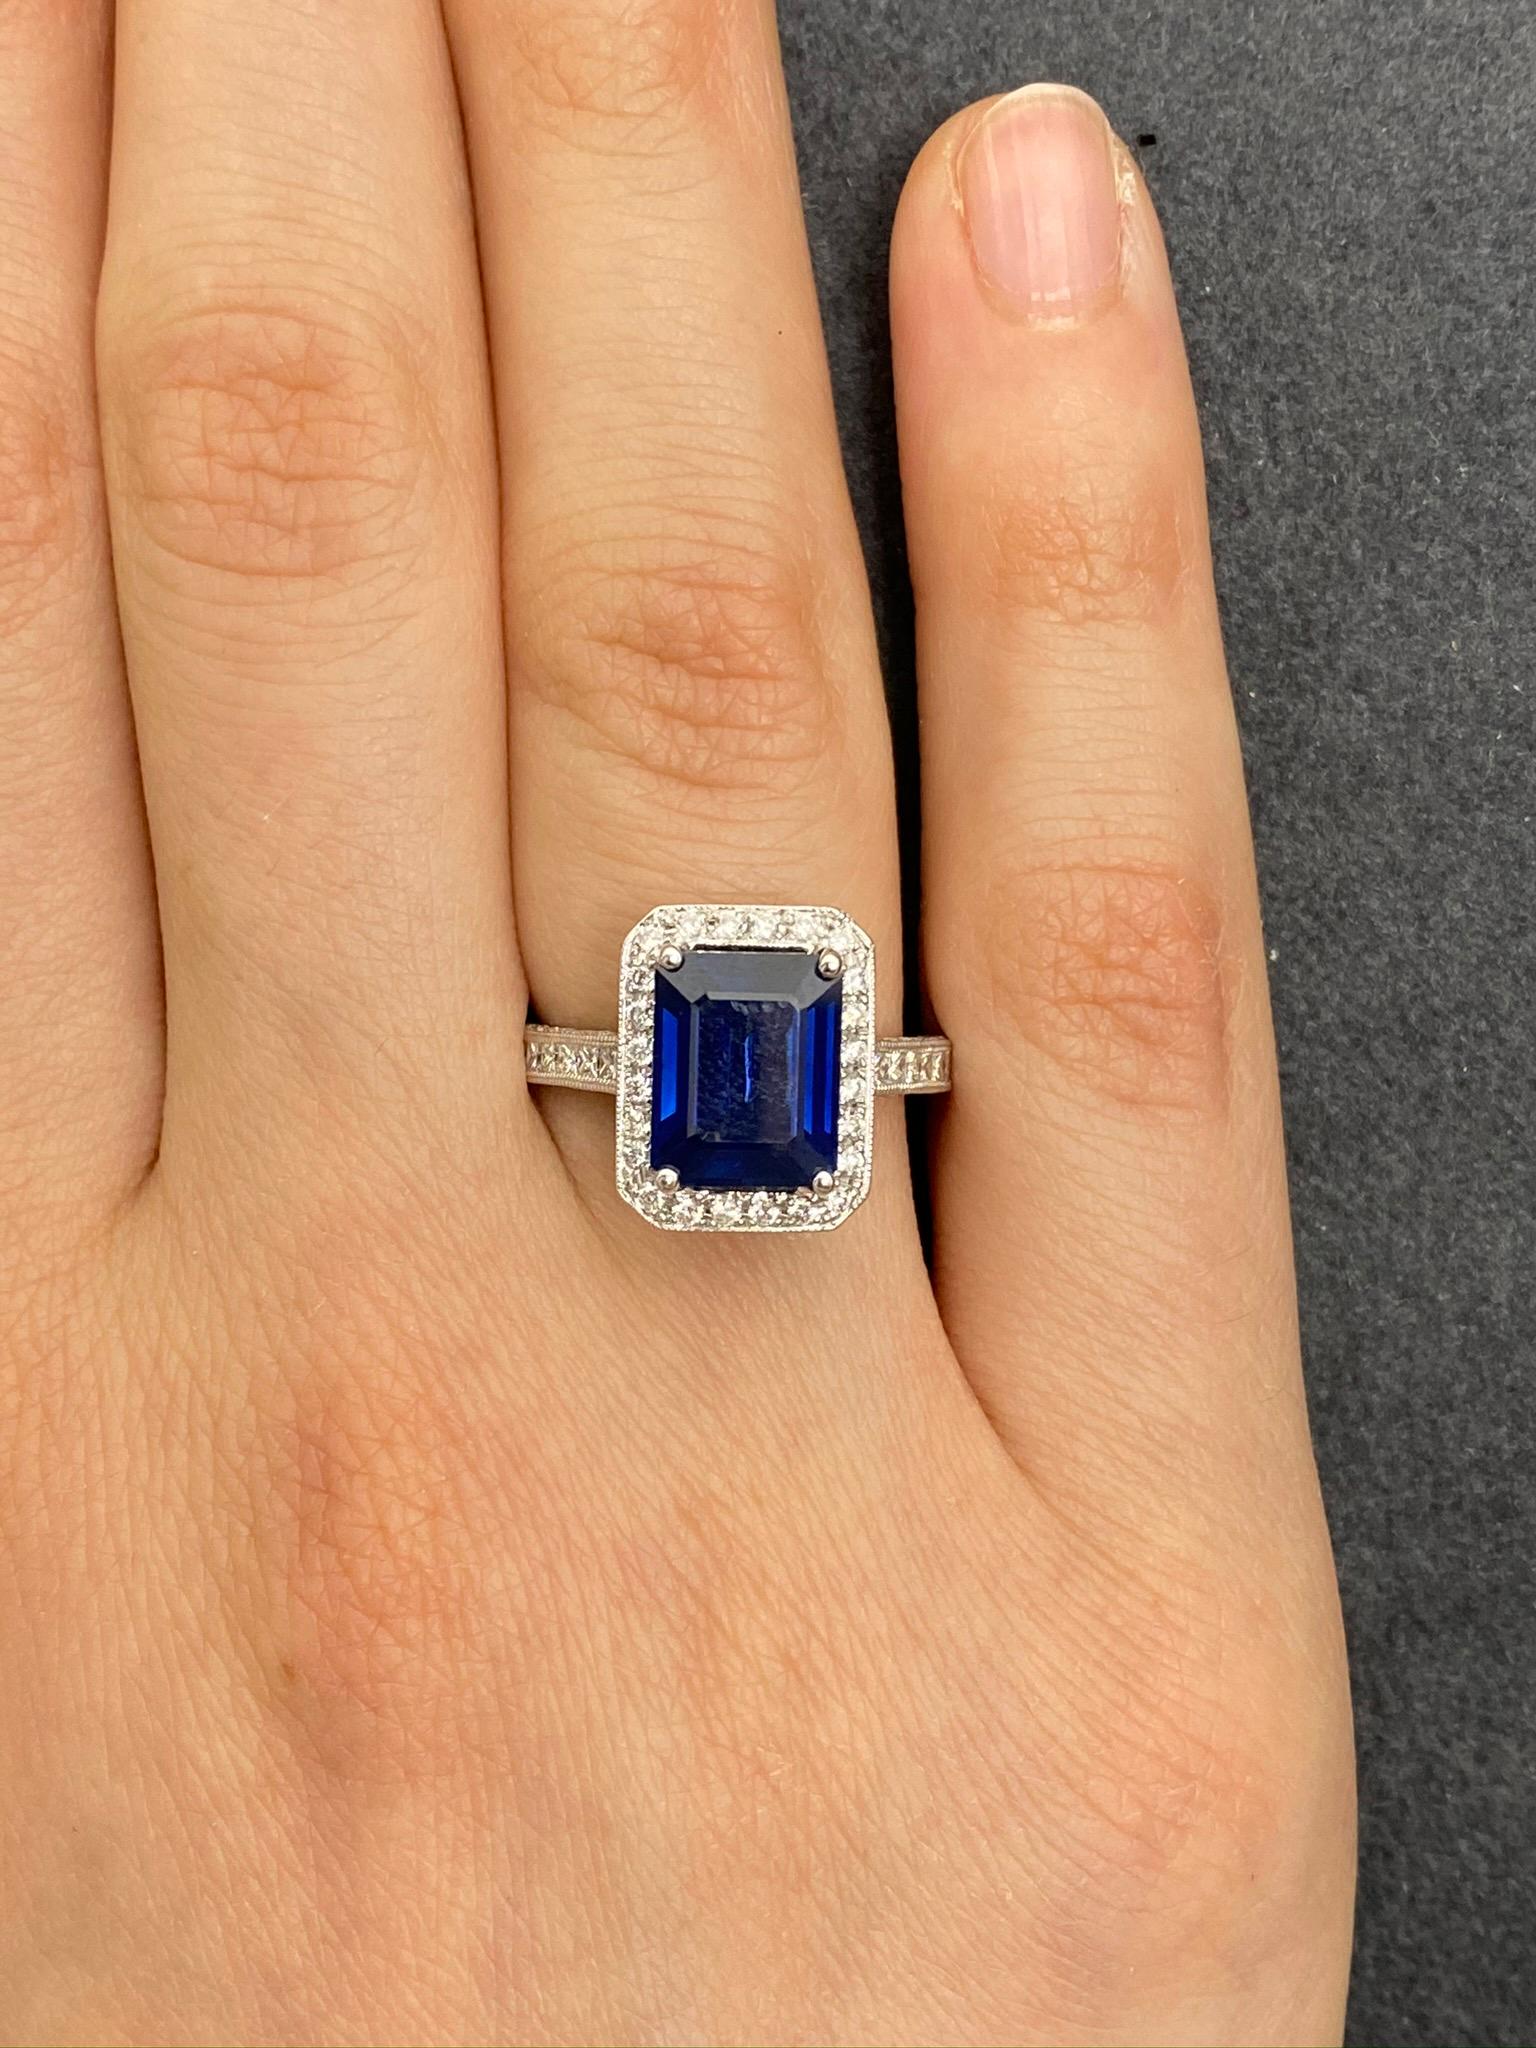 Women's 3.97 Carat Emerald Cut Sapphire and Diamond Ring For Sale